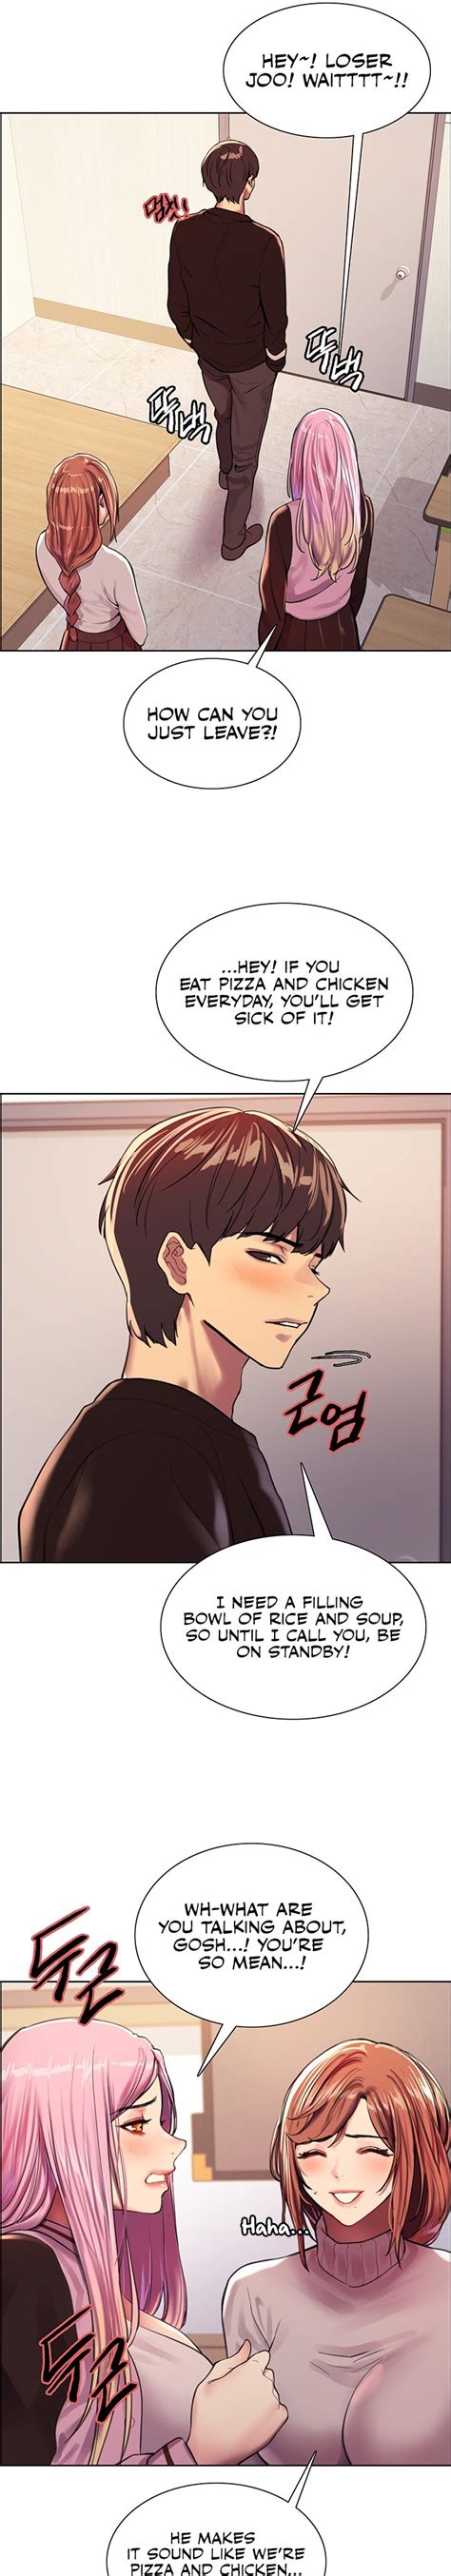 Read Sex Stopwatch Chapter 52 Online You are reading Chapter 52 of the manhwa Sex Stopwatch, one of the stories of genres, popular and many readers. . 